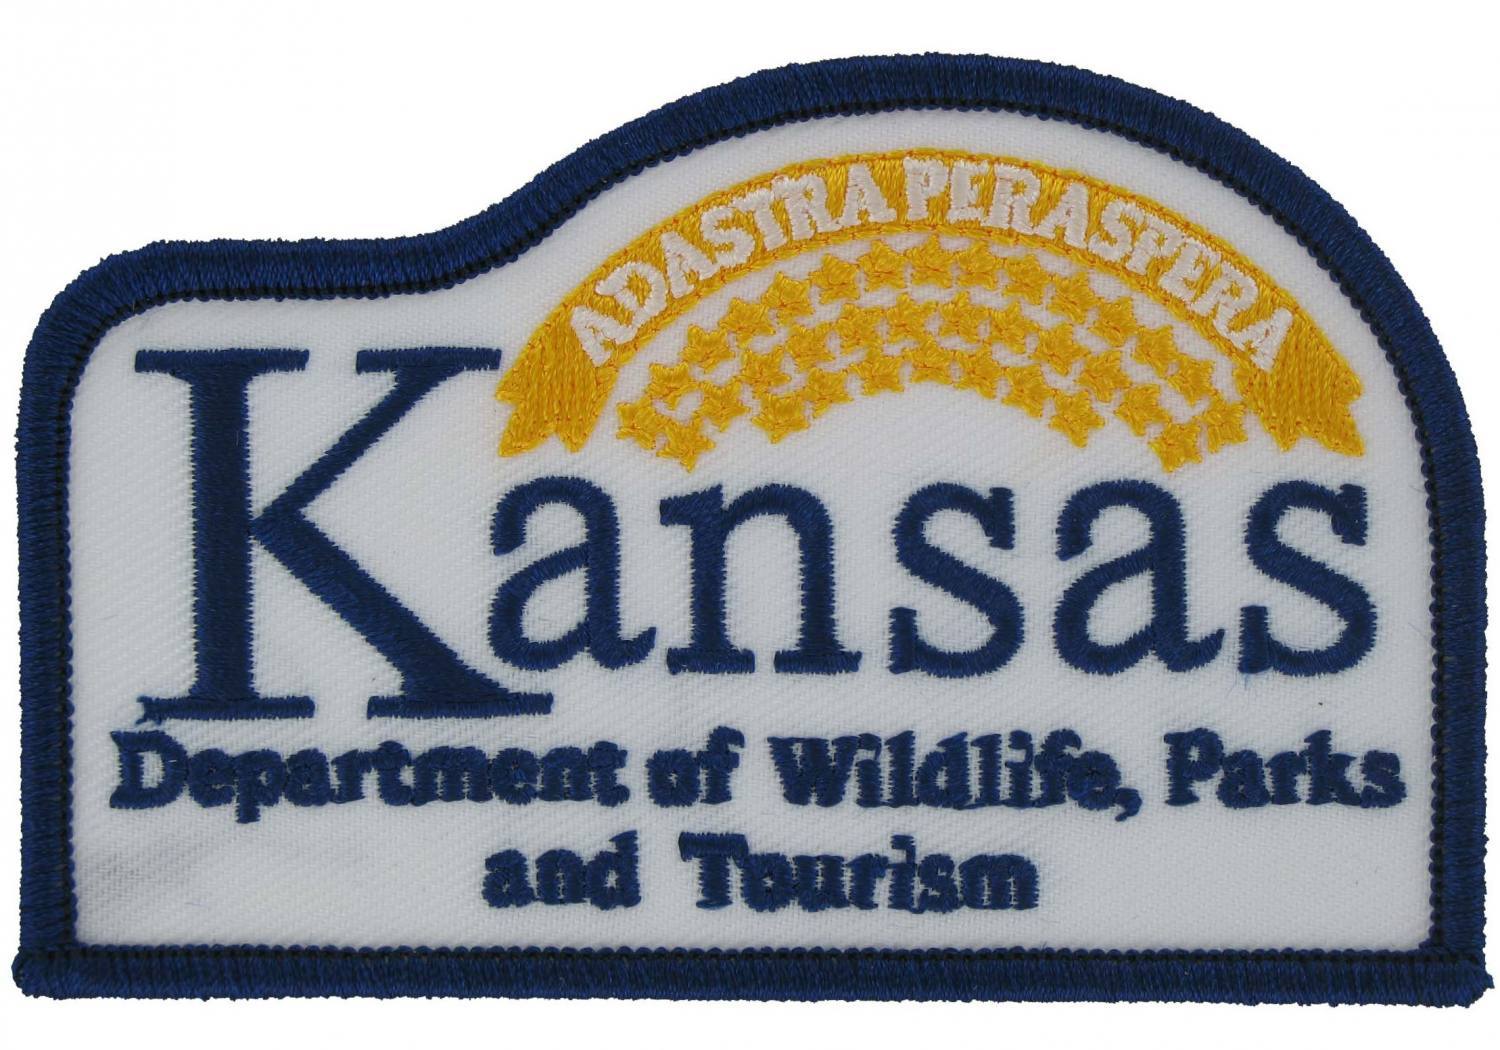 Department of Wildlife Patch